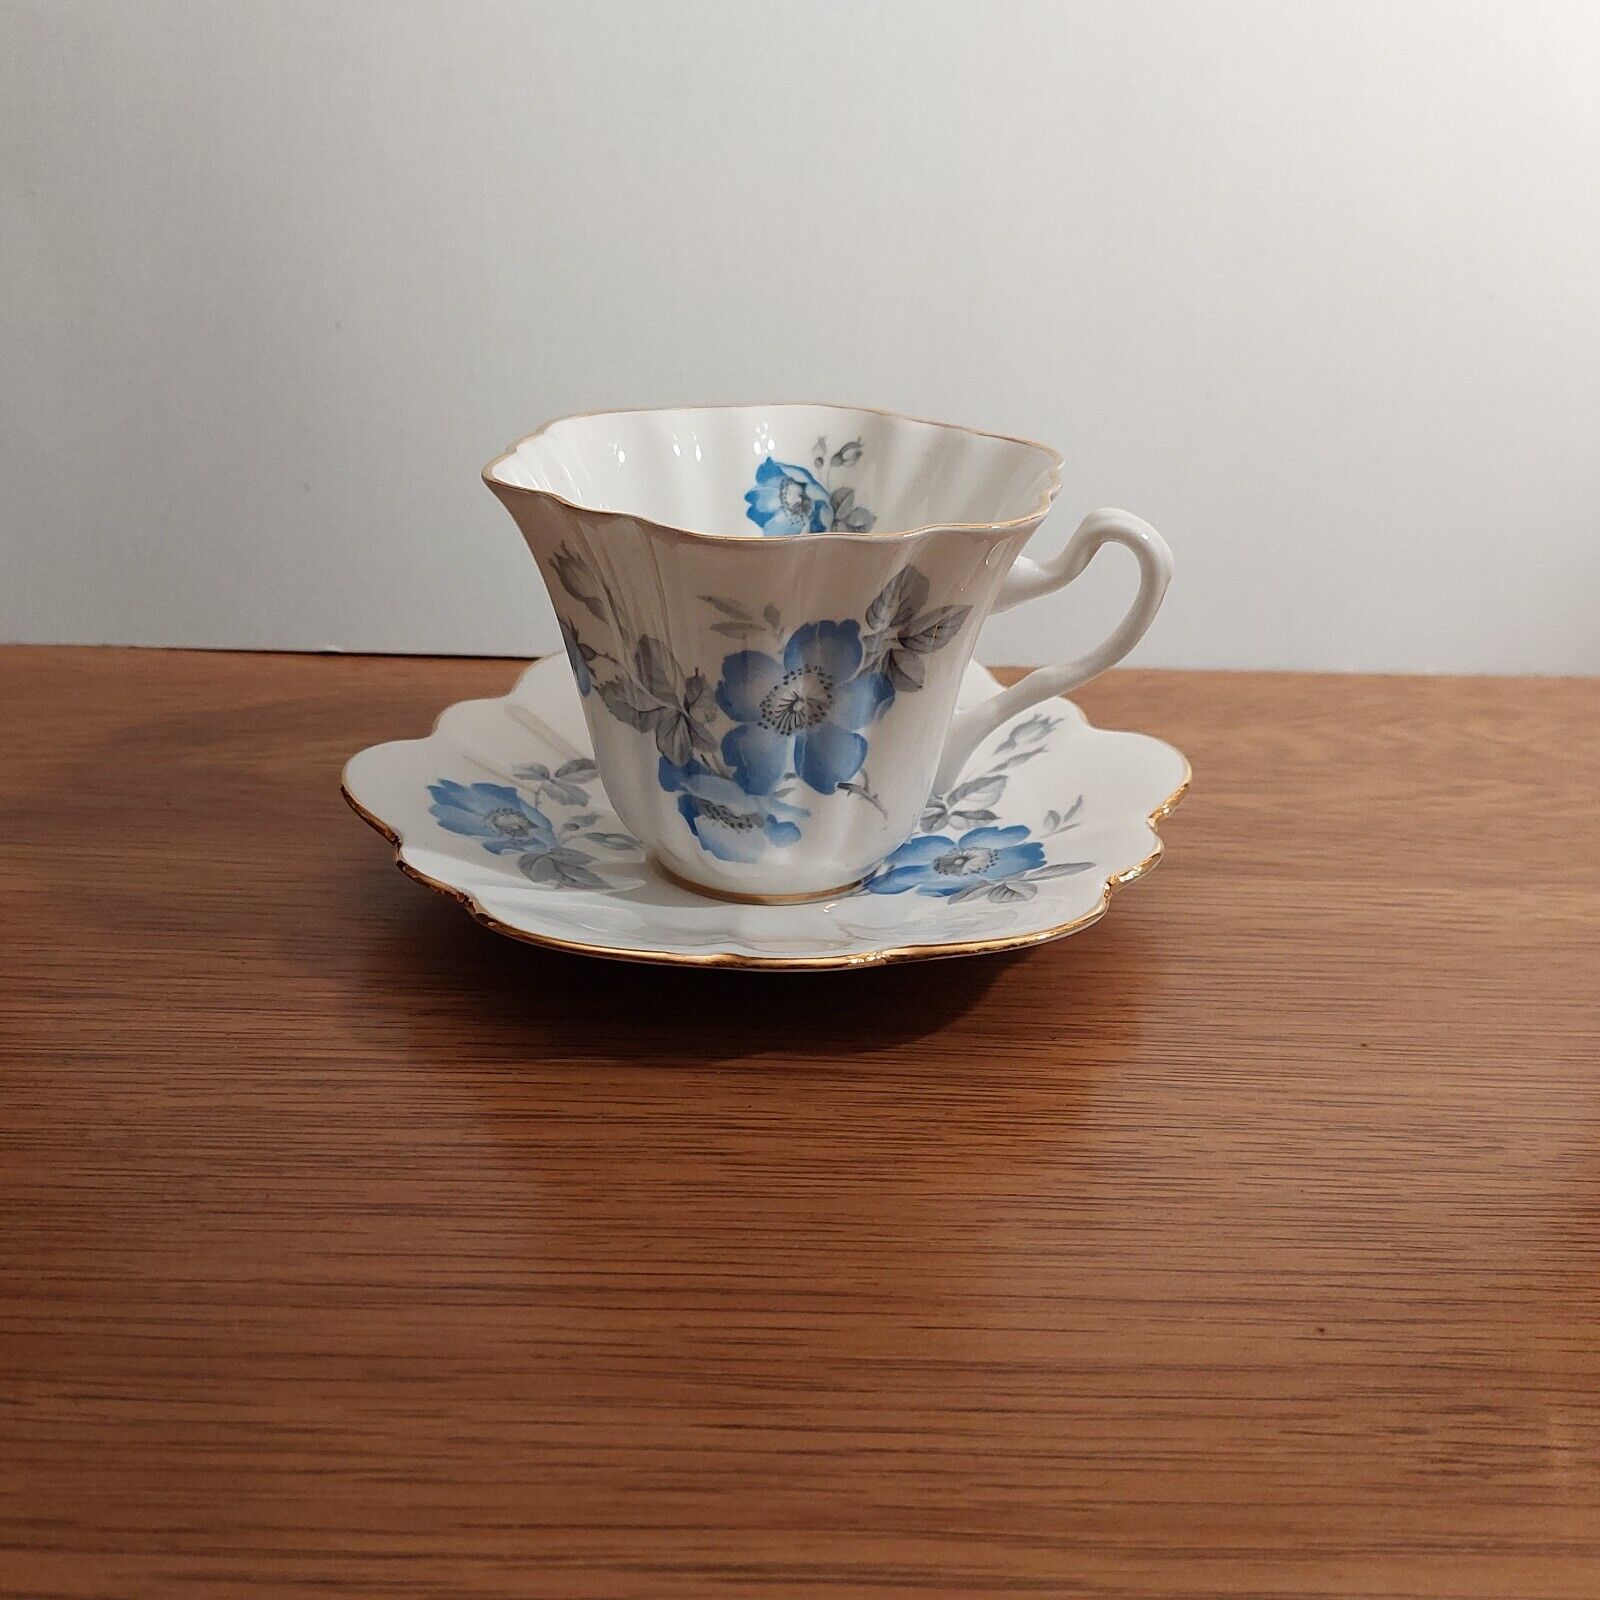 Vintage Crown Mark bone china Cup & Saucer made in England with Blue Rosehip